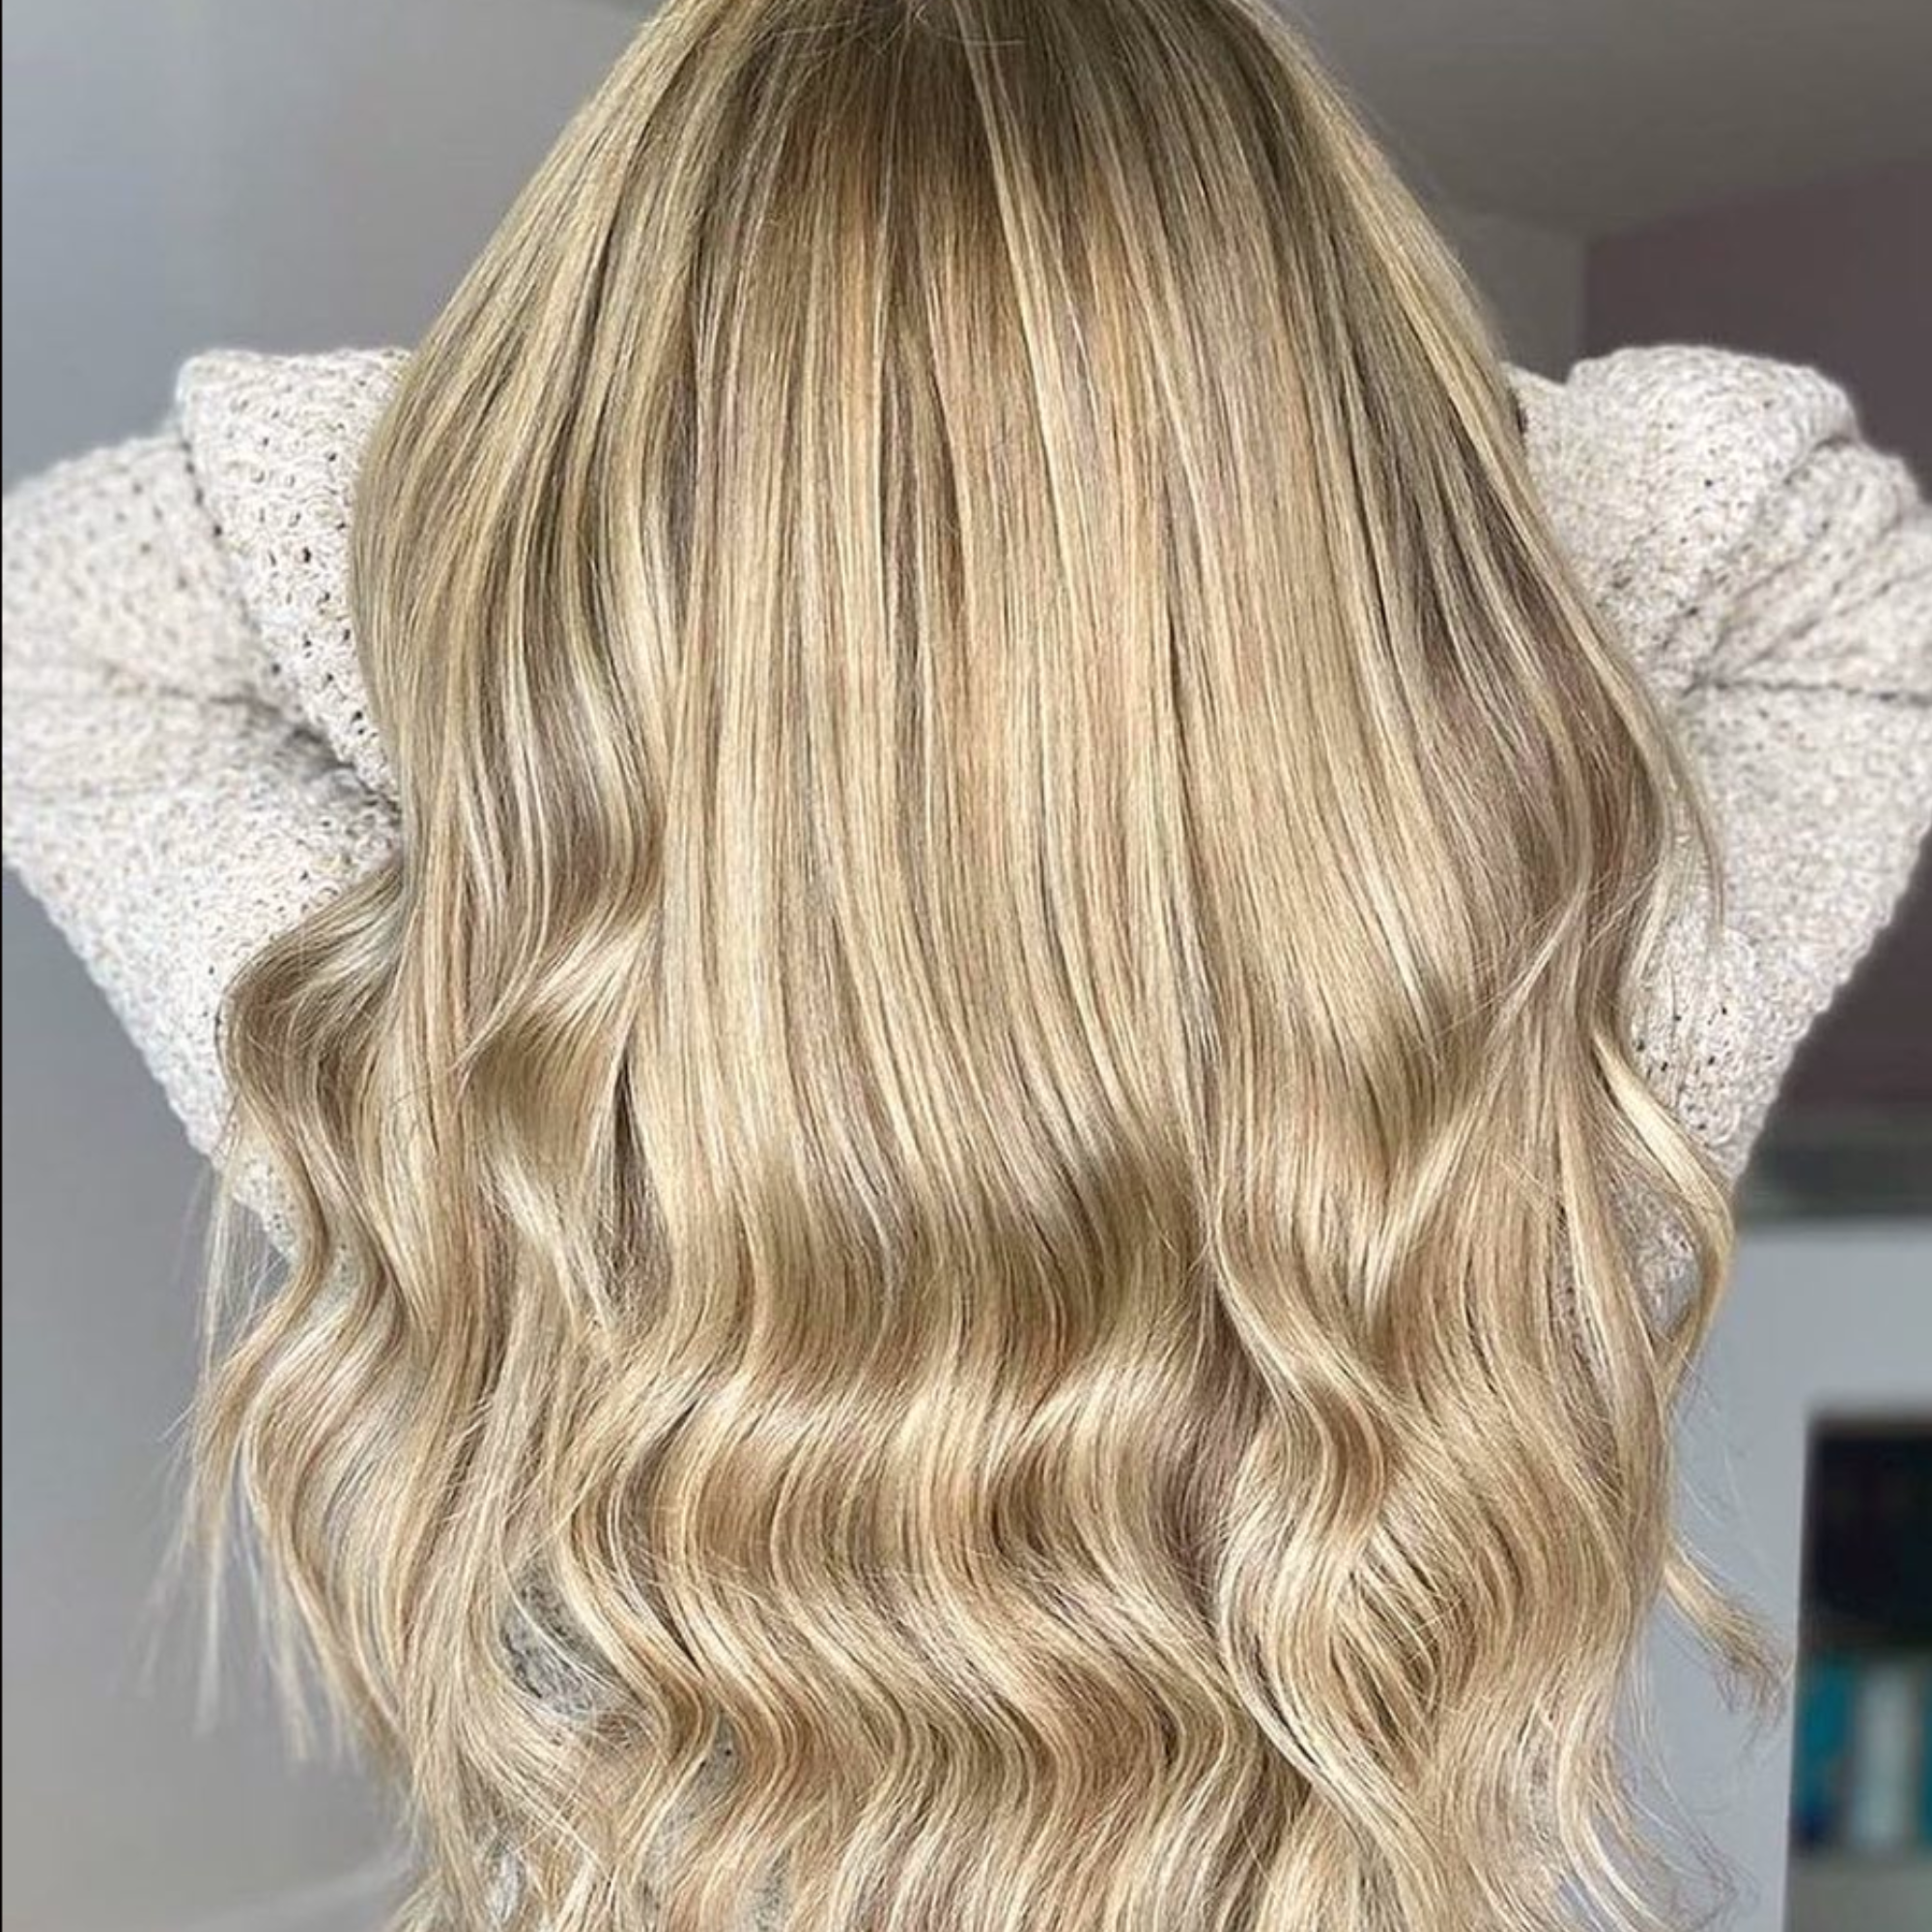 "hair rehab london 18" weft hair extensions shade swatch titled coachella blonde"